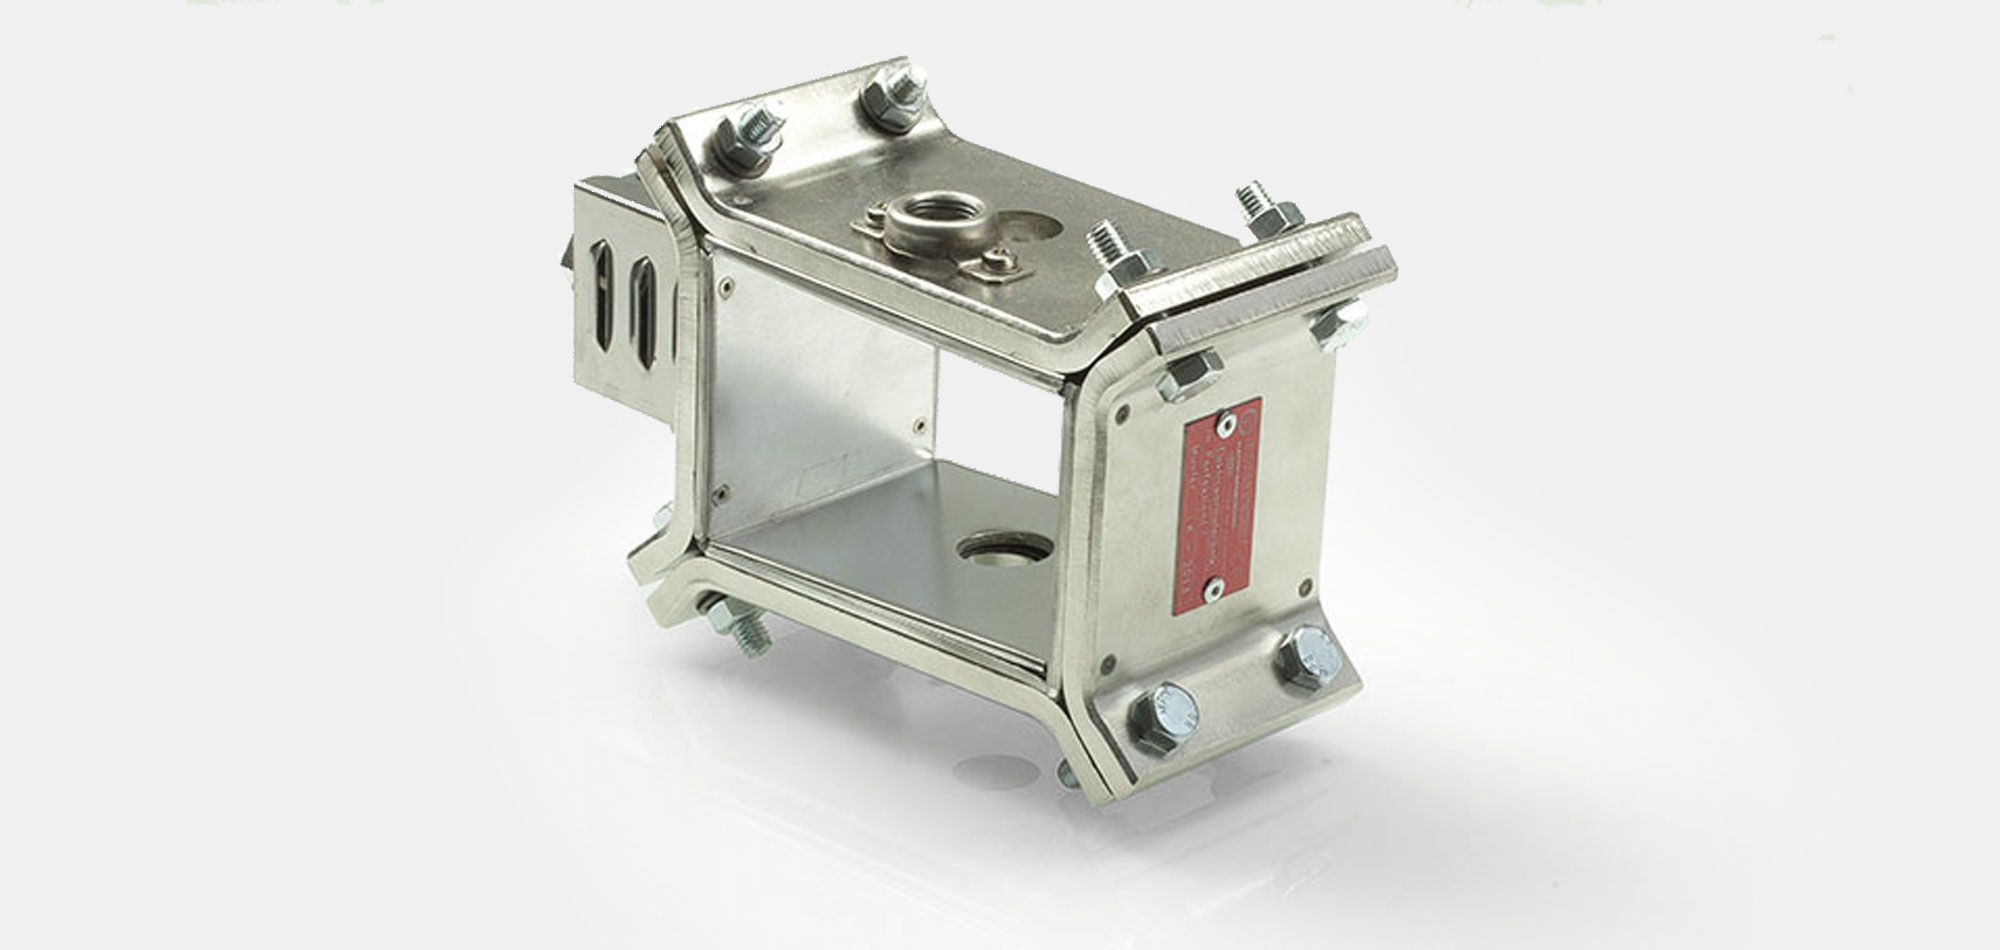 Tool Heater, Flat Heater, Frame Heater, for temperatures up to 450°C, extrusion, injection molding, plastic technology, holes, cutouts, thermocouple connector, integrated thermocouple, mineral insulated